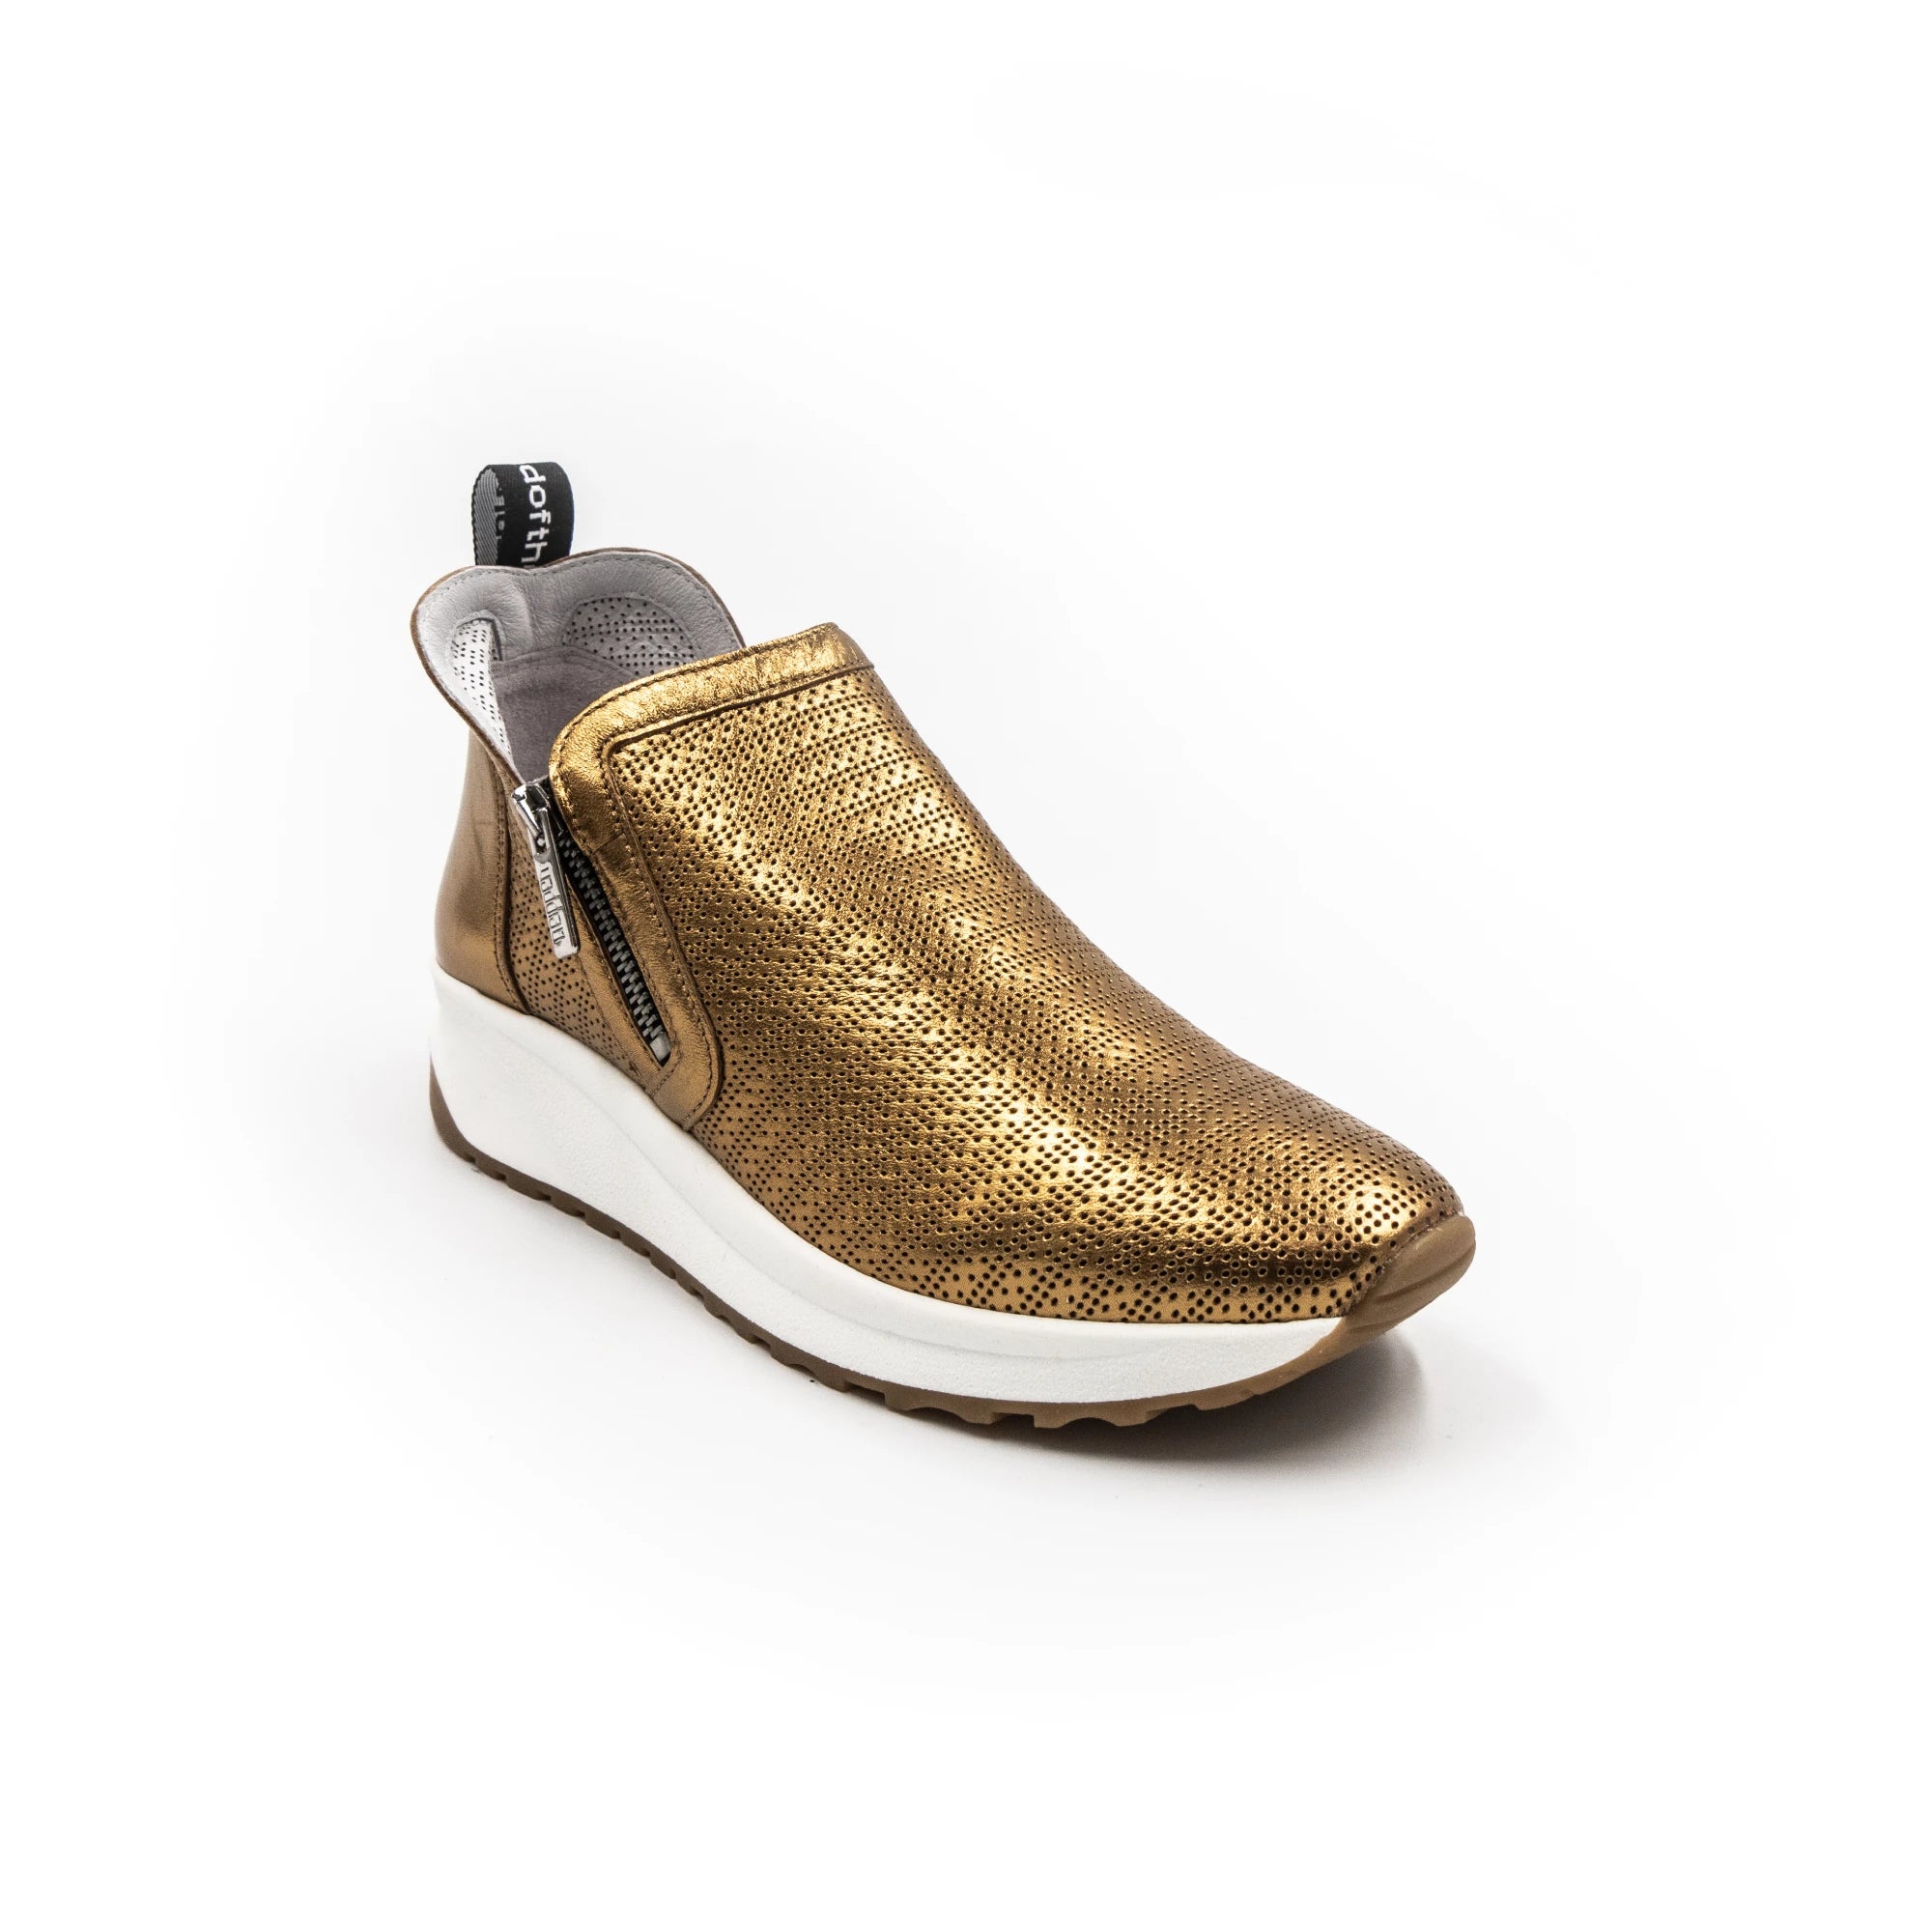 Sneakers with gold accents and zippers.